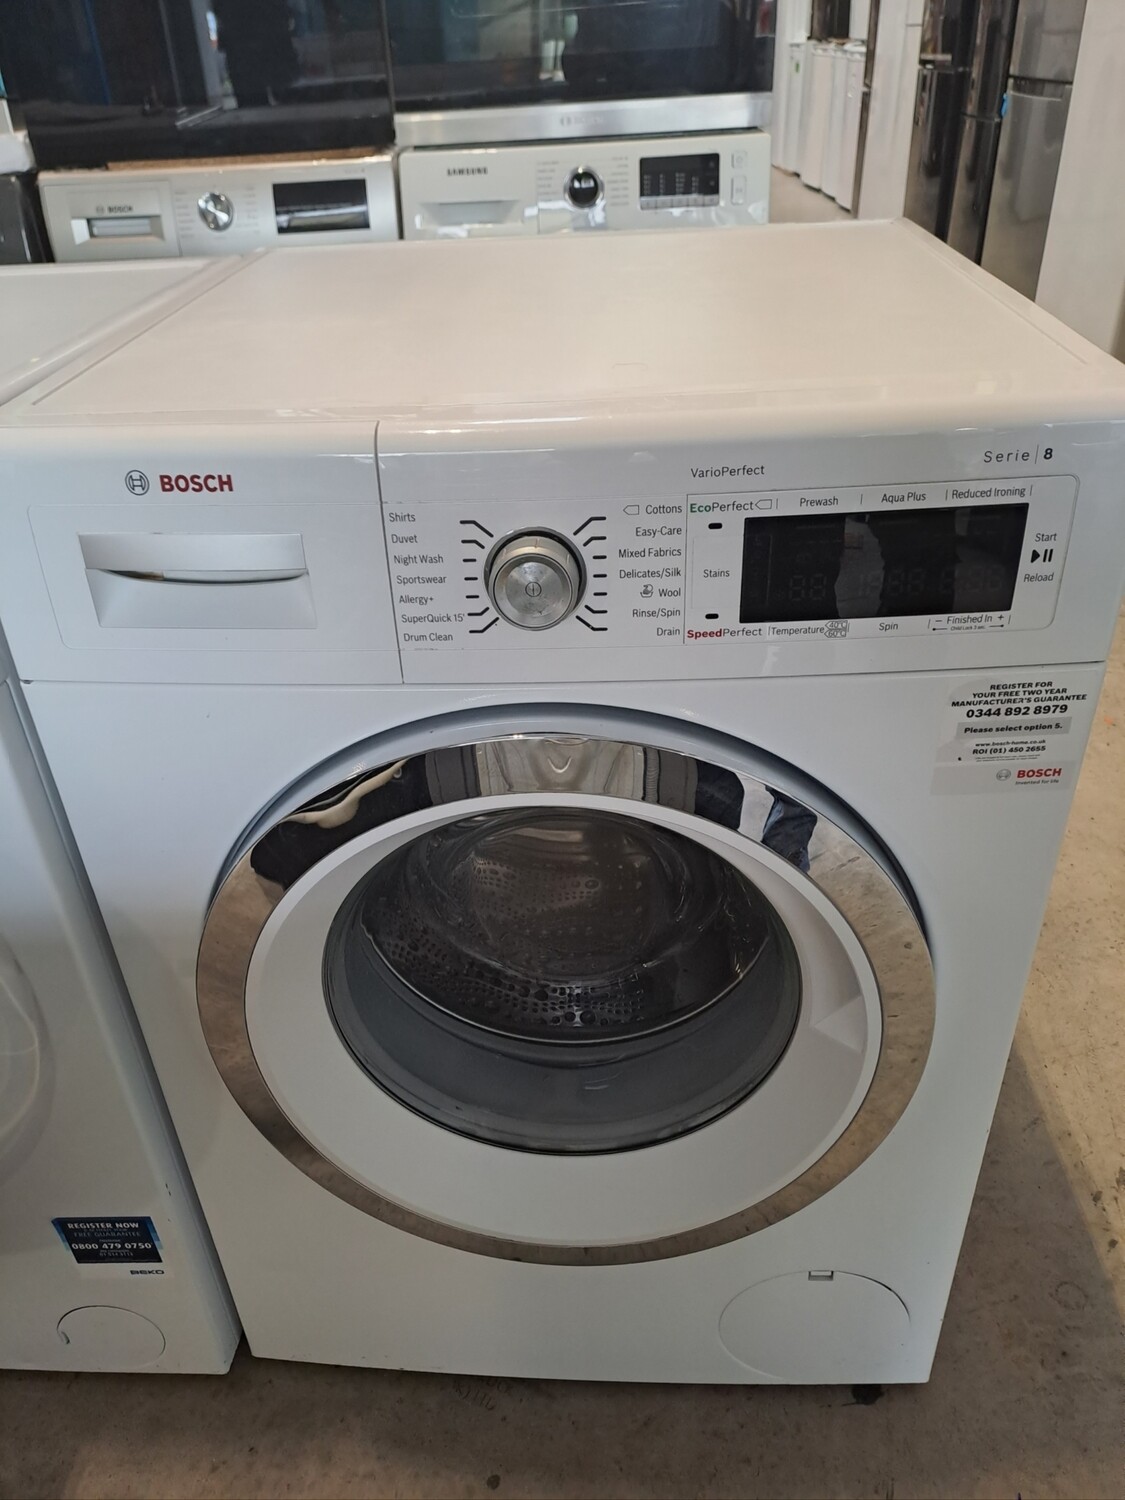 Bosch Serie 8 WAW32560GB 8kg Load 1400 Spin Washing Machine - White - Refurbished - 6 Month Guarantee. This item is located in our Whitby Road Shop